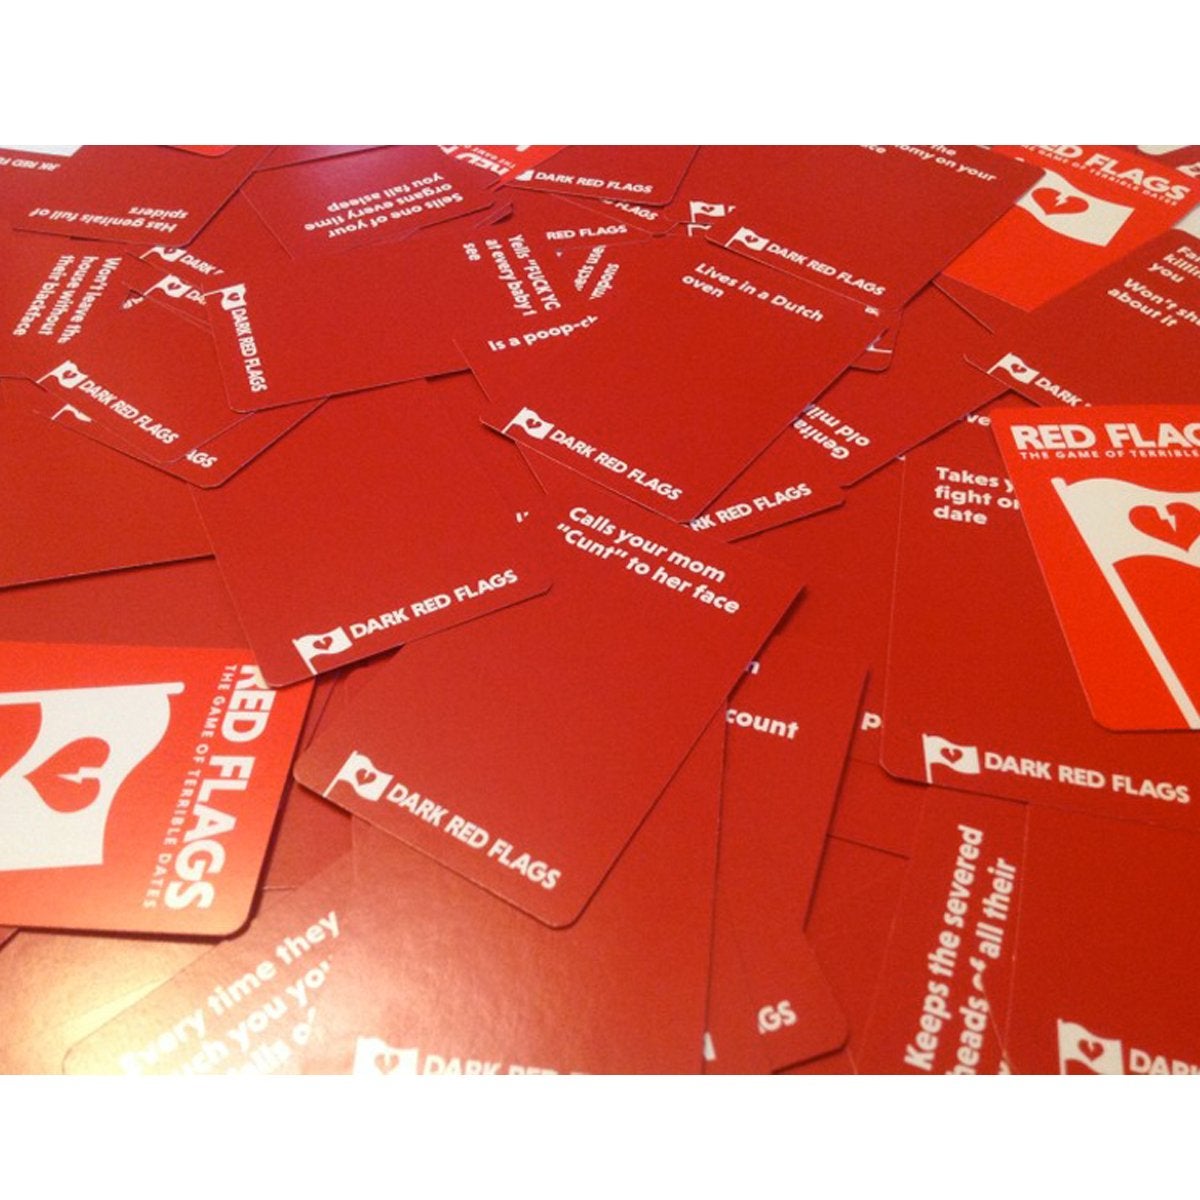 Red Flags Dark Red Flags Expansion Card Game Buy Card Games